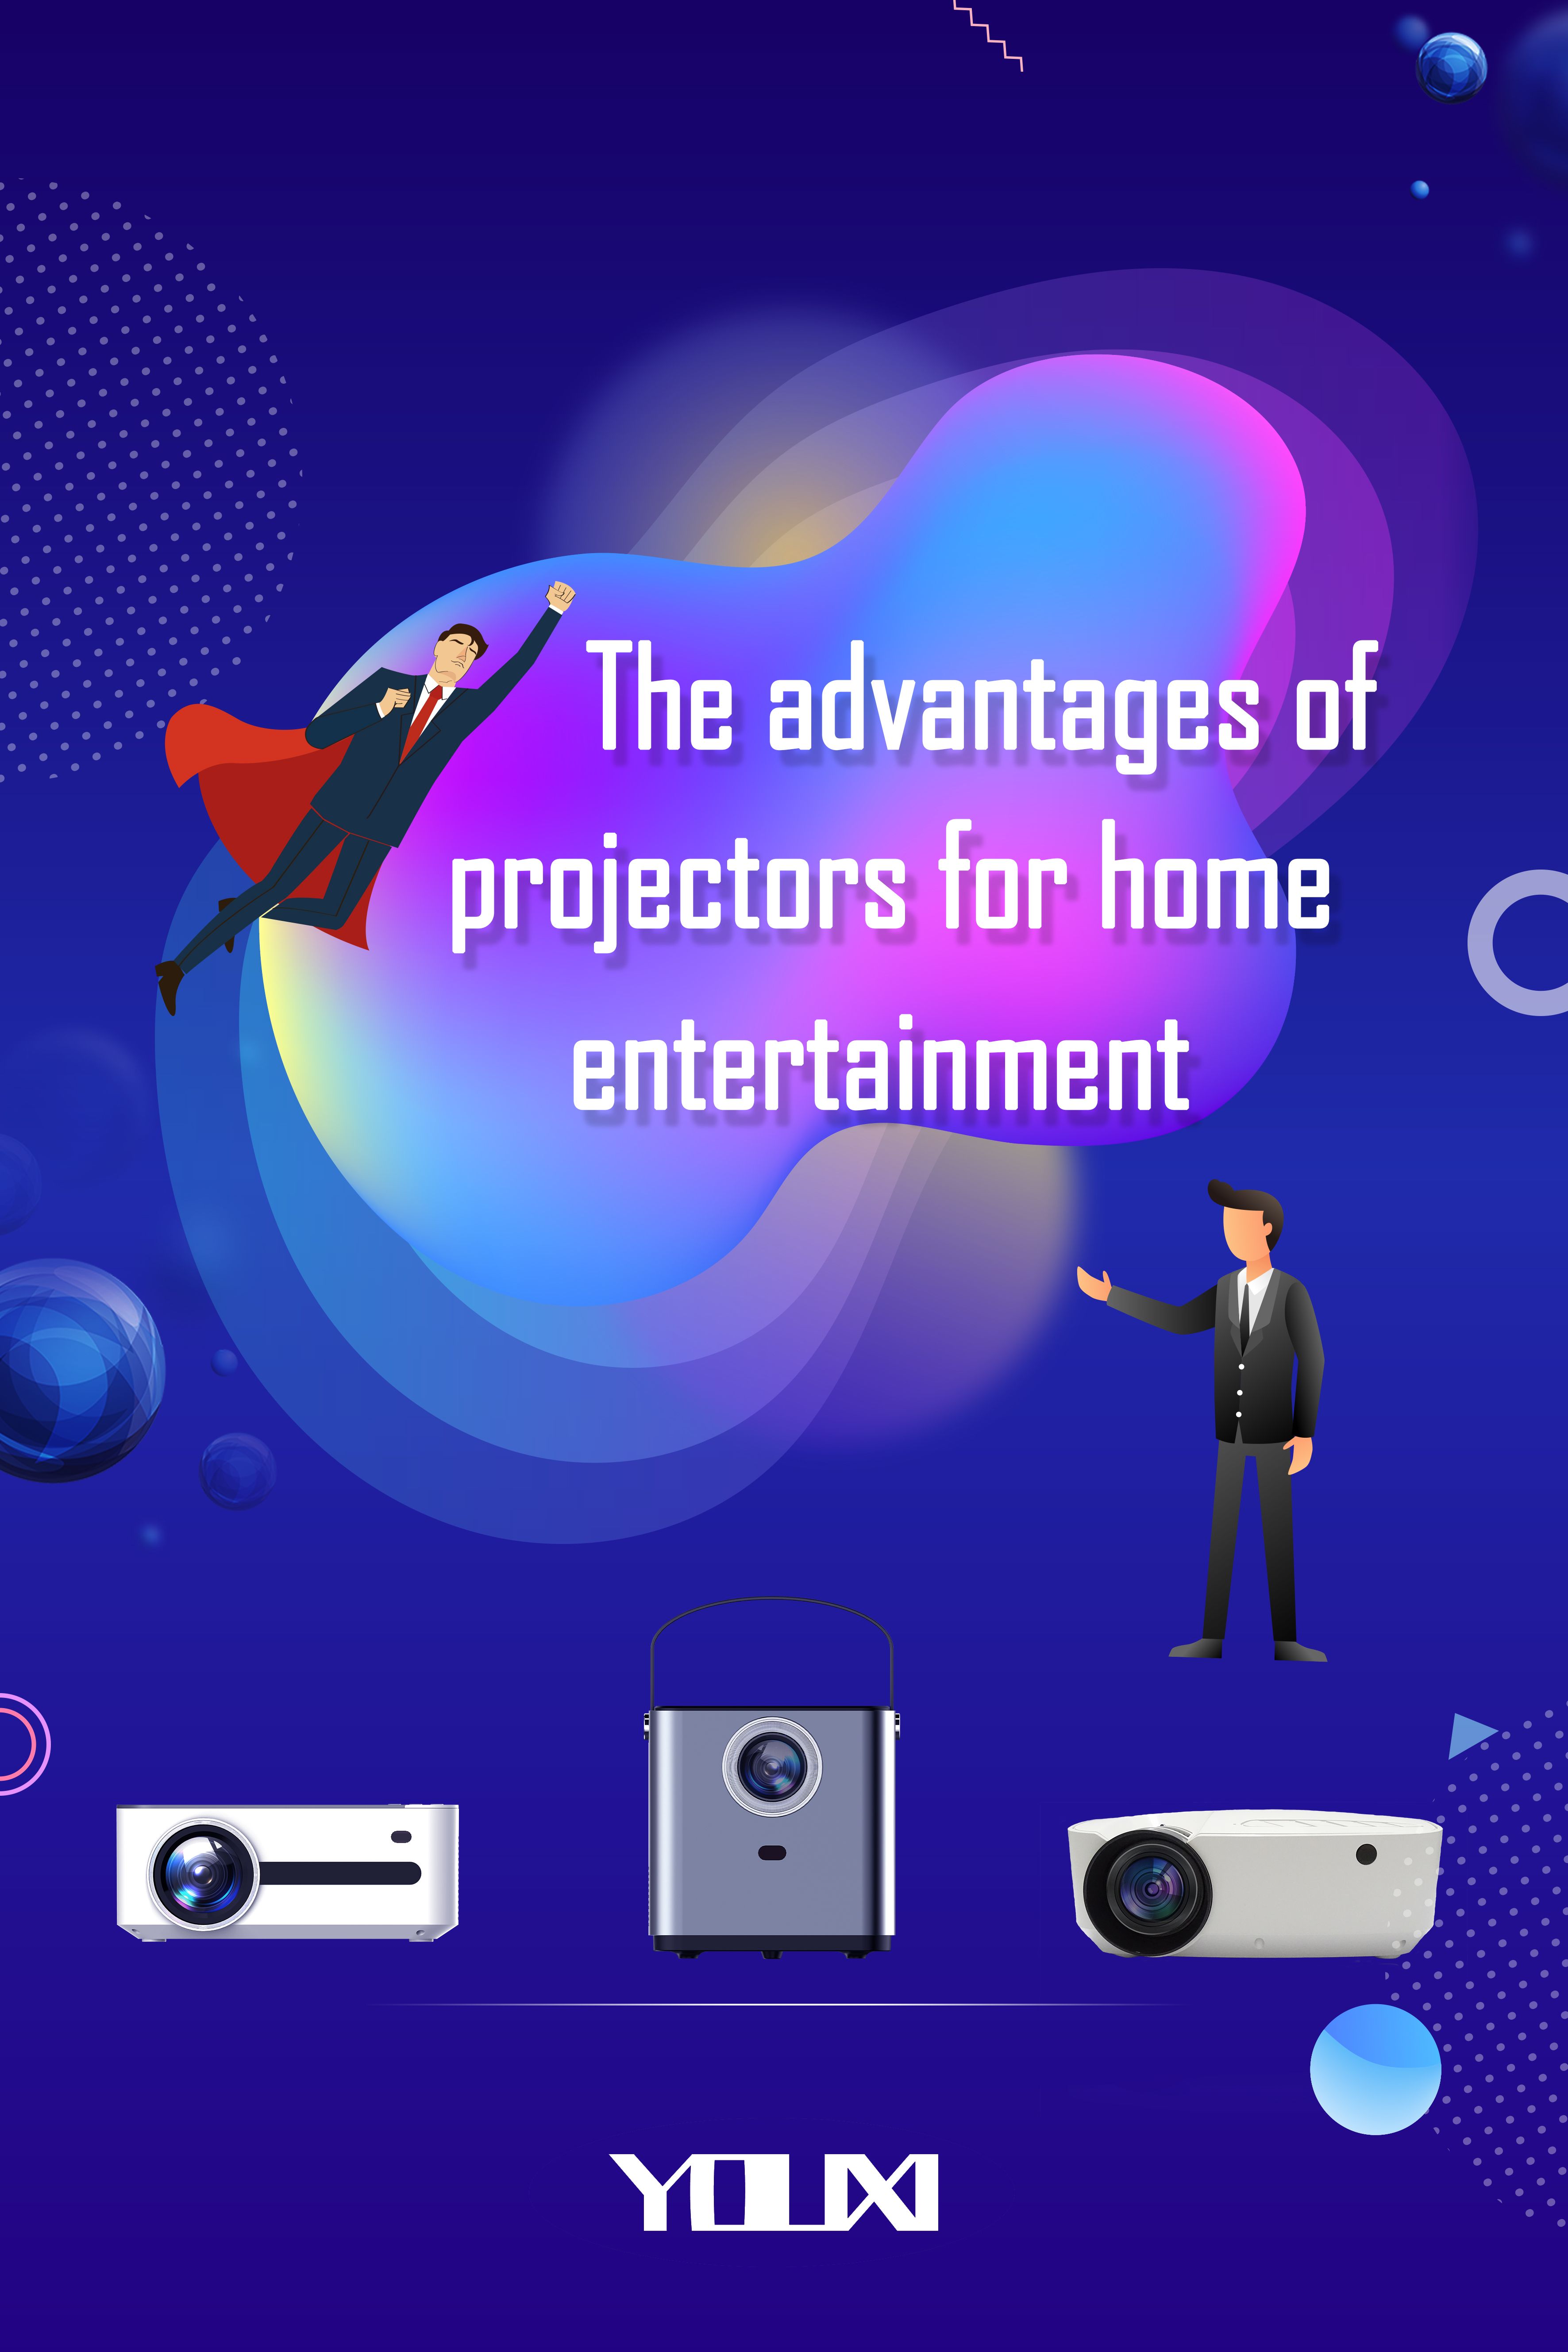 The advantages of projectors for home entertainment